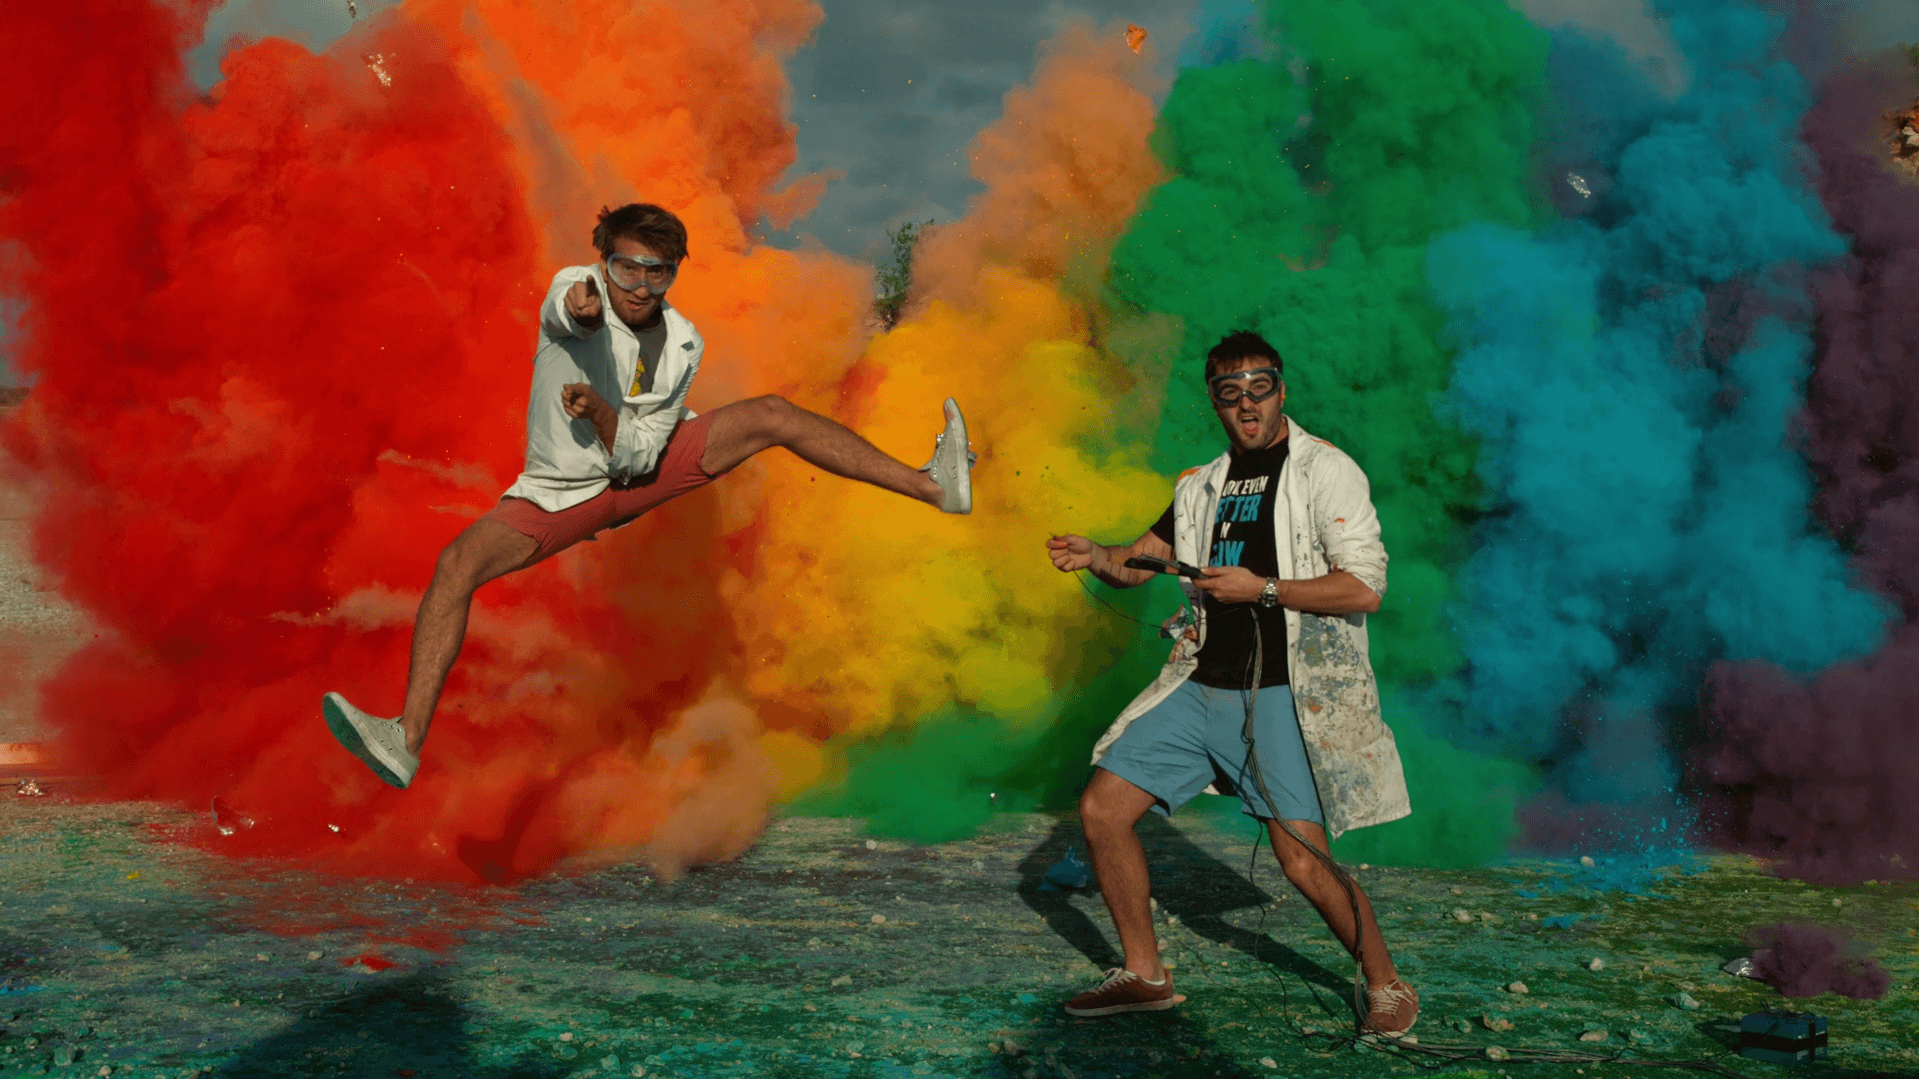 The Slow Mo Guys in 25 Airbag Rainbow Explosion [1920x1080]